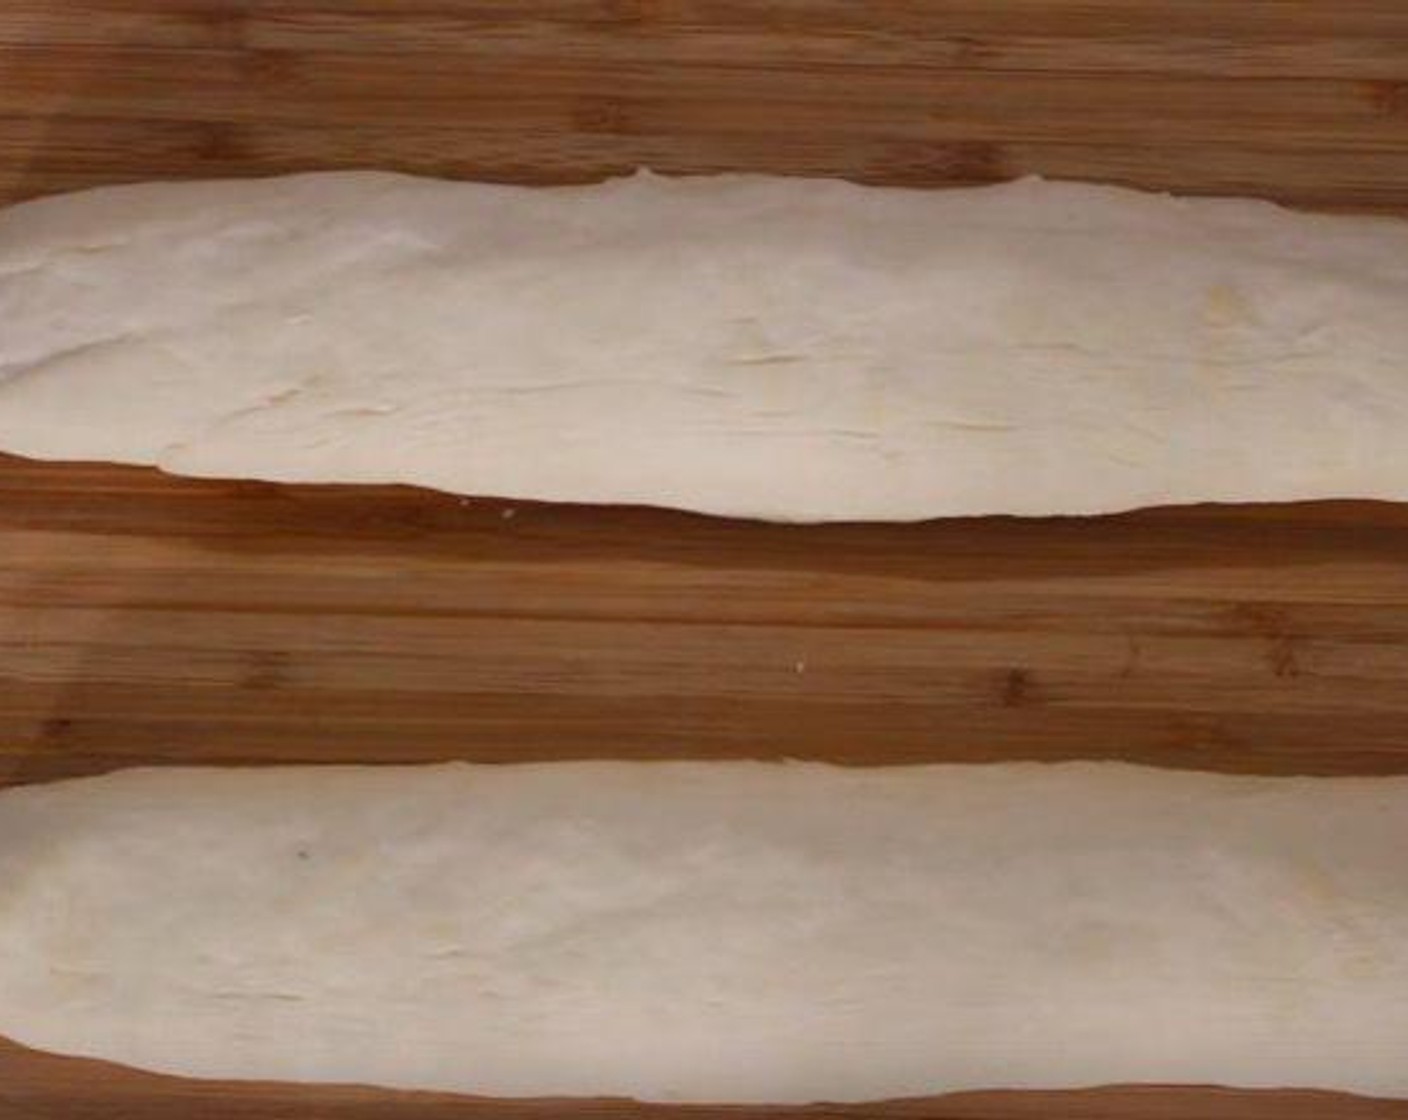 step 6 Turn the dough out onto a clean surface and divide it into 2 pieces. Roll each piece into a 12-inch long loaf.